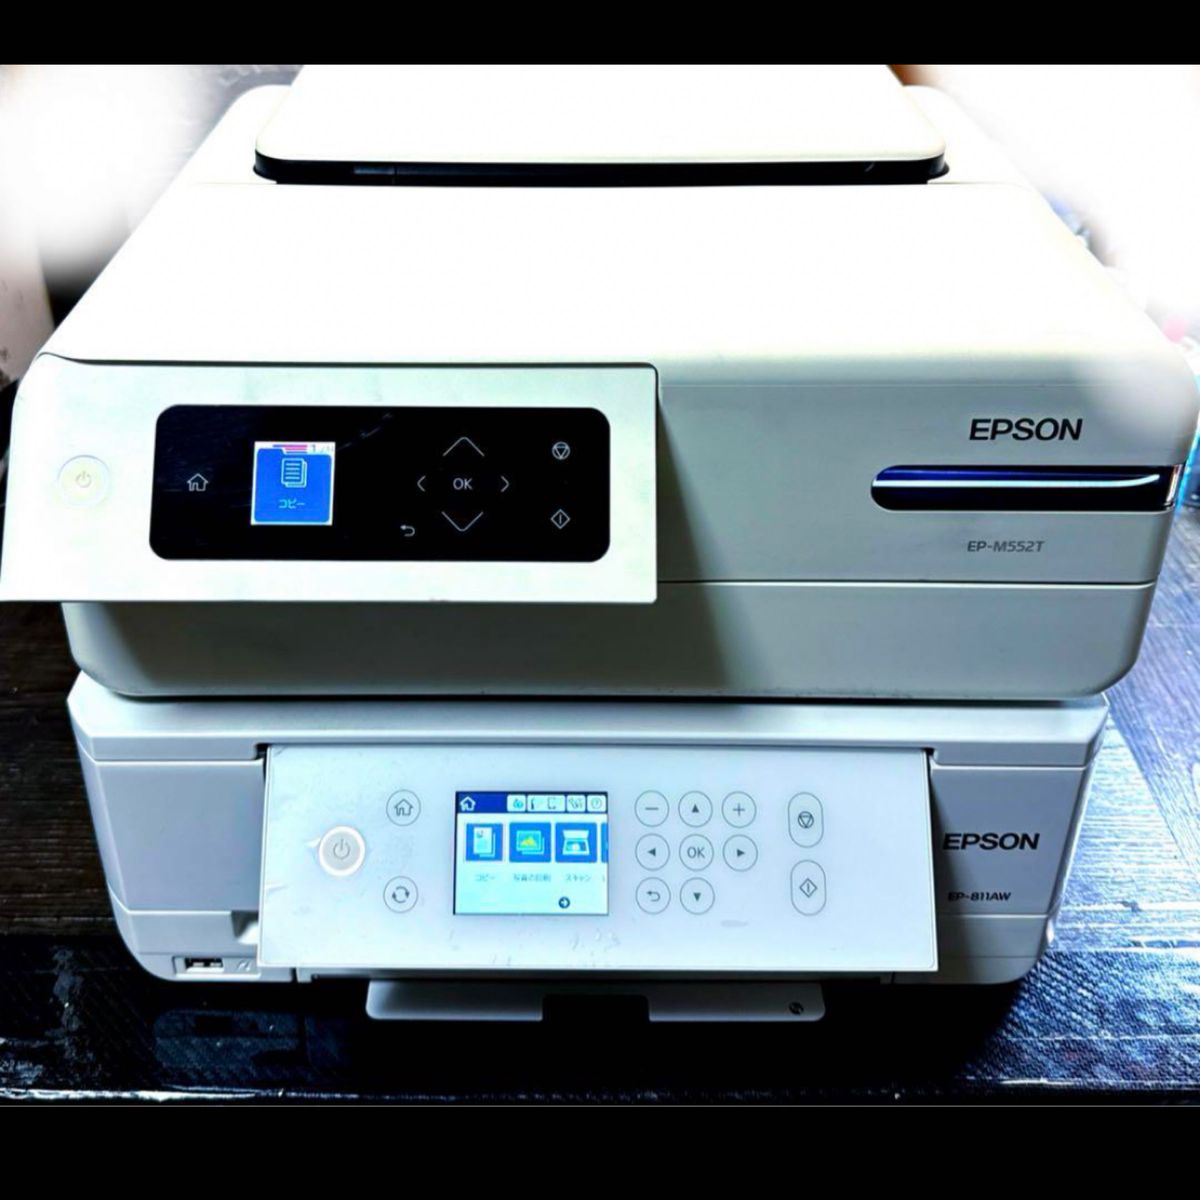 EPSON EP-811Aw ジャンク EPSON EP-M552T ジャンク